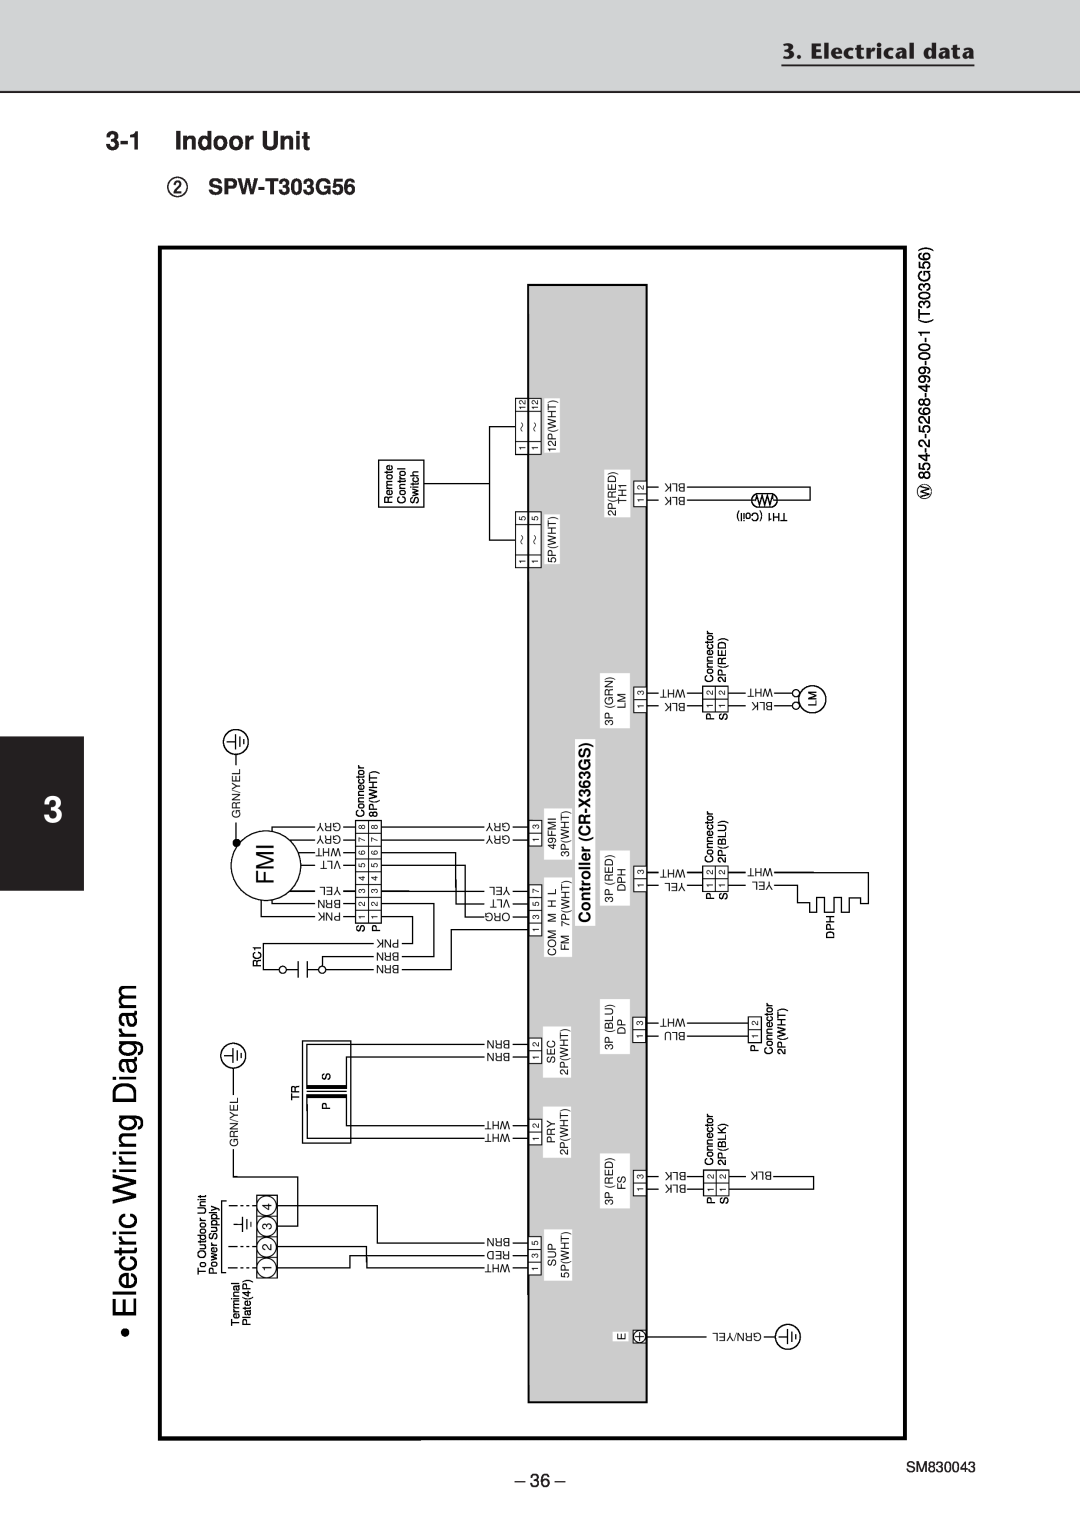 Sanyo SPW-T363GS56, SPW-T483G56, SPW-T483GS56, SPW-C363G8 Wiring Diagram, 3-1Indoor Unit, Electrical data, 2SPW-T303G56 